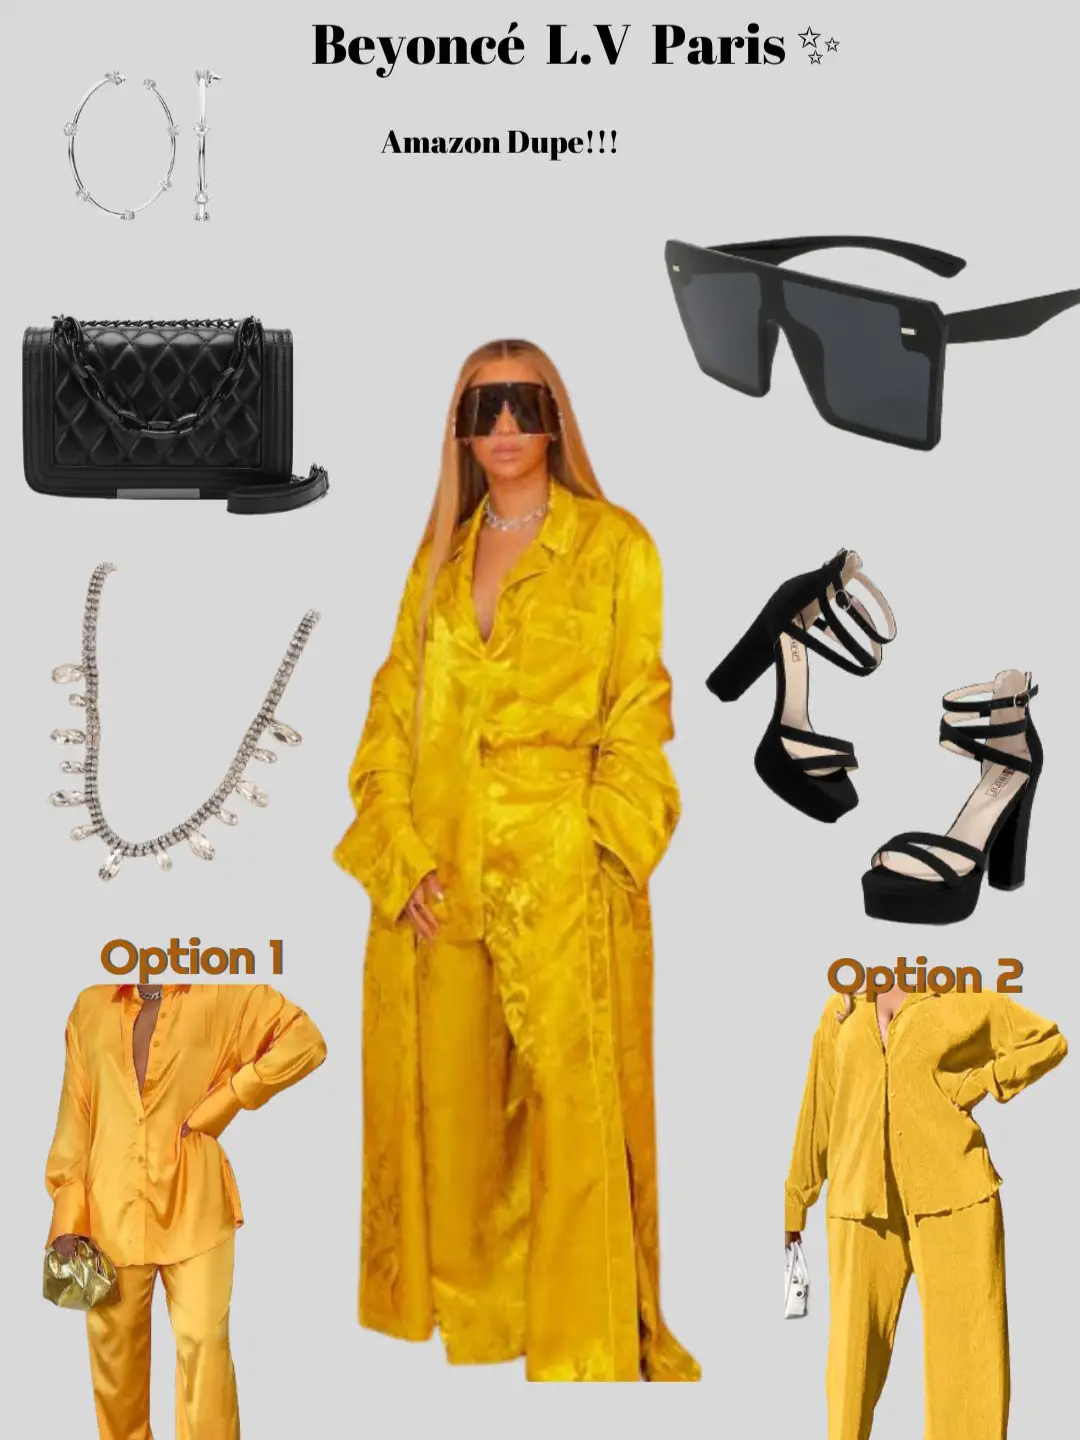 Dupes for Beyoncé's outfit in L.V, Gallery posted by Manana